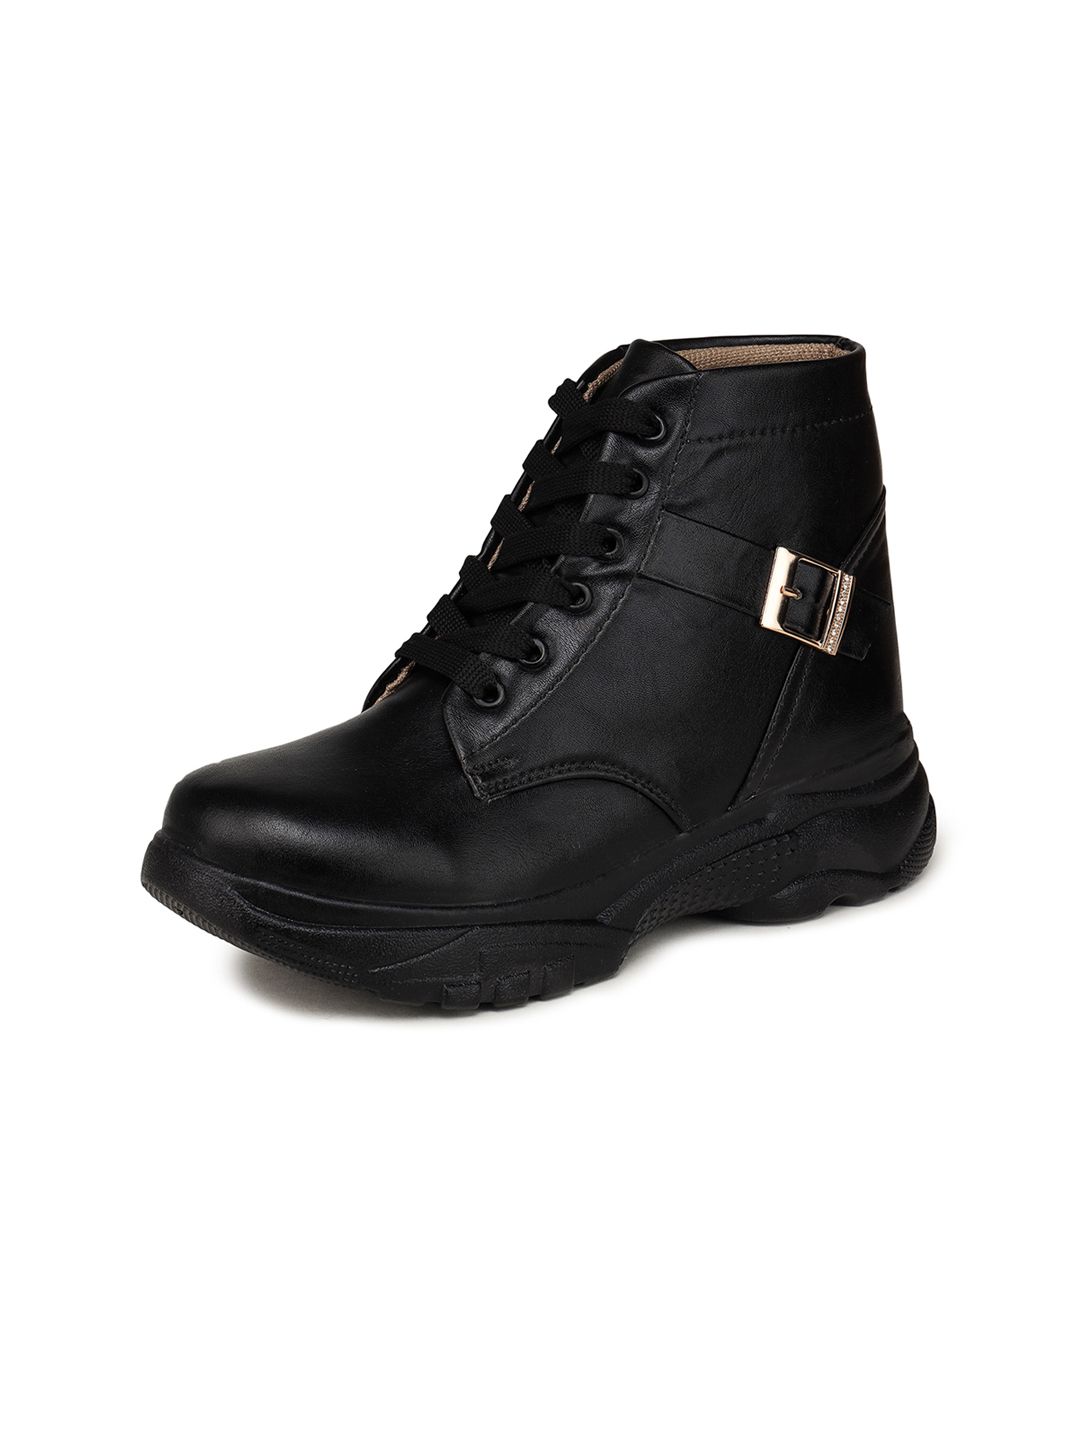 BOOTCO Women Black Solid Ankle-High Boots Price in India